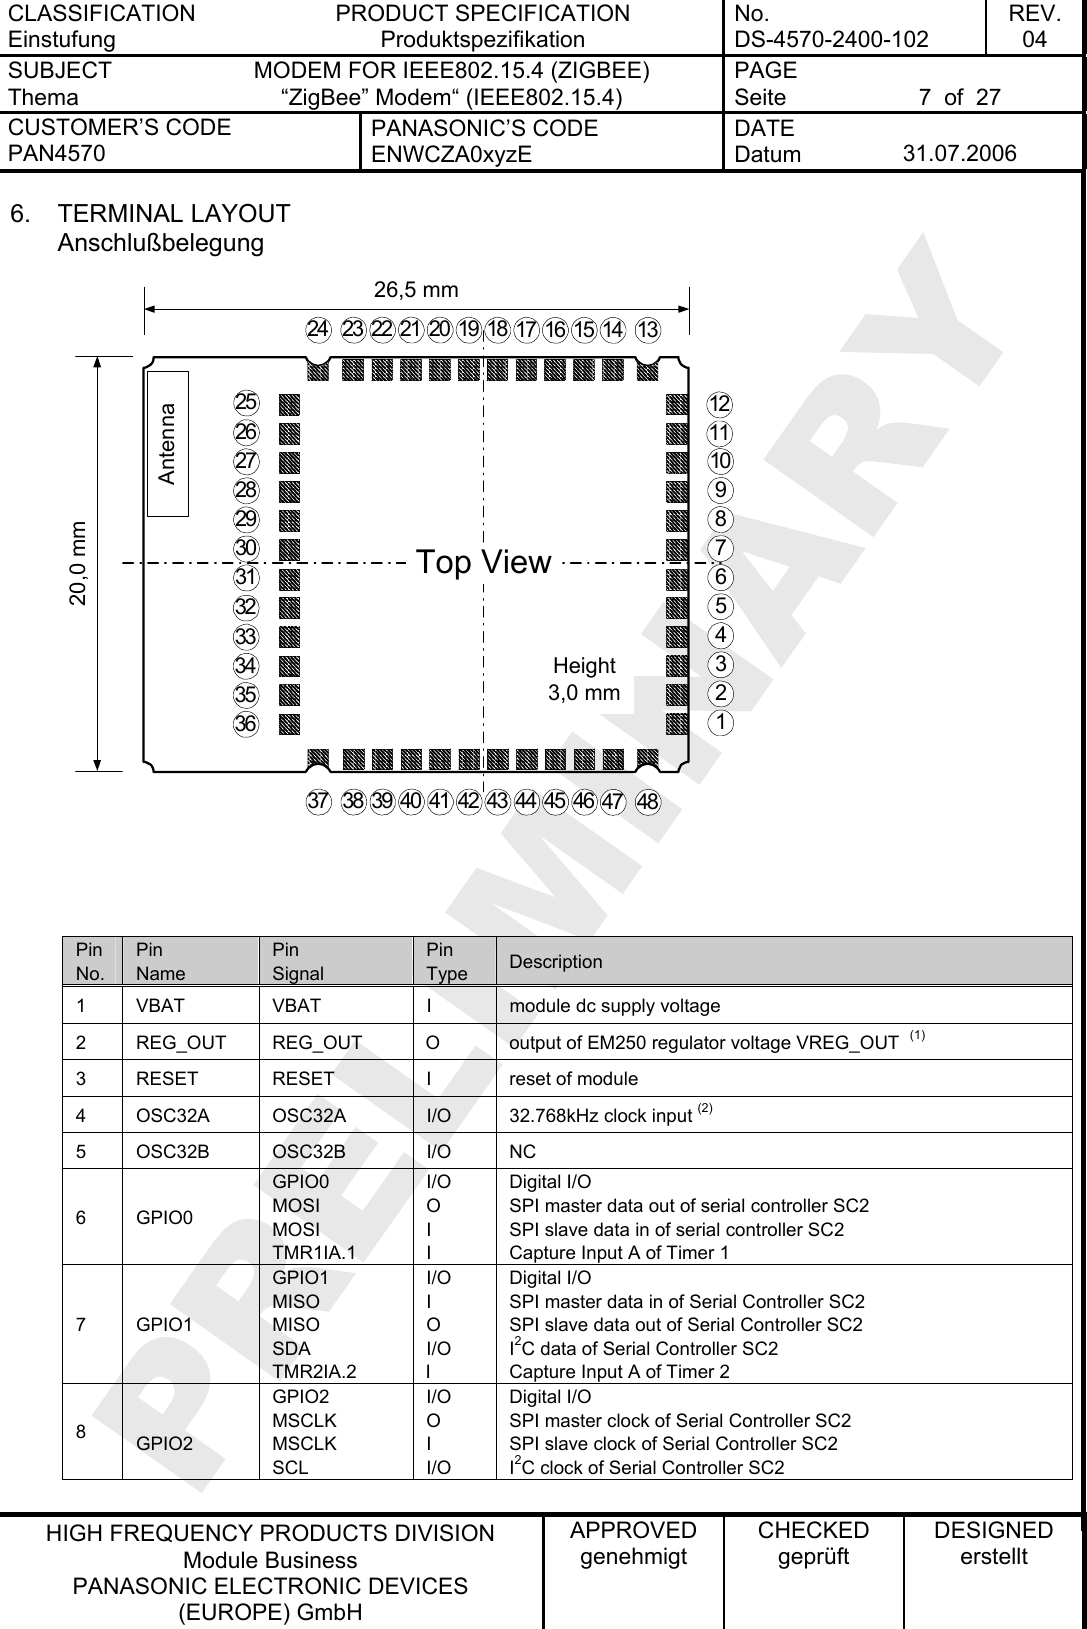 CLASSIFICATION Einstufung PRODUCT SPECIFICATION Produktspezifikation No. DS-4570-2400-102 REV. 04 SUBJECT Thema MODEM FOR IEEE802.15.4 (ZIGBEE) “ZigBee” Modem“ (IEEE802.15.4)   PAGE Seite  7  of  27 CUSTOMER’S CODE PAN4570 PANASONIC’S CODE ENWCZA0xyzE DATE Datum  31.07.2006   HIGH FREQUENCY PRODUCTS DIVISION Module Business PANASONIC ELECTRONIC DEVICES  (EUROPE) GmbH APPROVED genehmigt CHECKED geprüft DESIGNED erstellt 6. TERMINAL LAYOUT Anschlußbelegung Top View25123456789104140393837 42 43 44 4645313029282726,5 mm20,0 mmHeight3,0 mm2647 482021222324 1918 17 1516 141311123233343536Antenna   Pin No. Pin Name Pin Signal Pin Type  Description 1  VBAT  VBAT  I  module dc supply voltage 2  REG_OUT  REG_OUT   O  output of EM250 regulator voltage VREG_OUT  (1) 3  RESET  RESET  I  reset of module 4  OSC32A  OSC32A  I/O   32.768kHz clock input (2) 5 OSC32B  OSC32B  I/O  NC 6 GPIO0 GPIO0 MOSI MOSI TMR1IA.1 I/O O I I Digital I/O SPI master data out of serial controller SC2 SPI slave data in of serial controller SC2 Capture Input A of Timer 1 7 GPIO1 GPIO1 MISO MISO SDA TMR2IA.2 I/O I O I/O  I Digital I/O SPI master data in of Serial Controller SC2 SPI slave data out of Serial Controller SC2 I2C data of Serial Controller SC2 Capture Input A of Timer 2 8   GPIO2  GPIO2 MSCLK MSCLK SCL I/O O I  I/O Digital I/O SPI master clock of Serial Controller SC2 SPI slave clock of Serial Controller SC2 I2C clock of Serial Controller SC2  